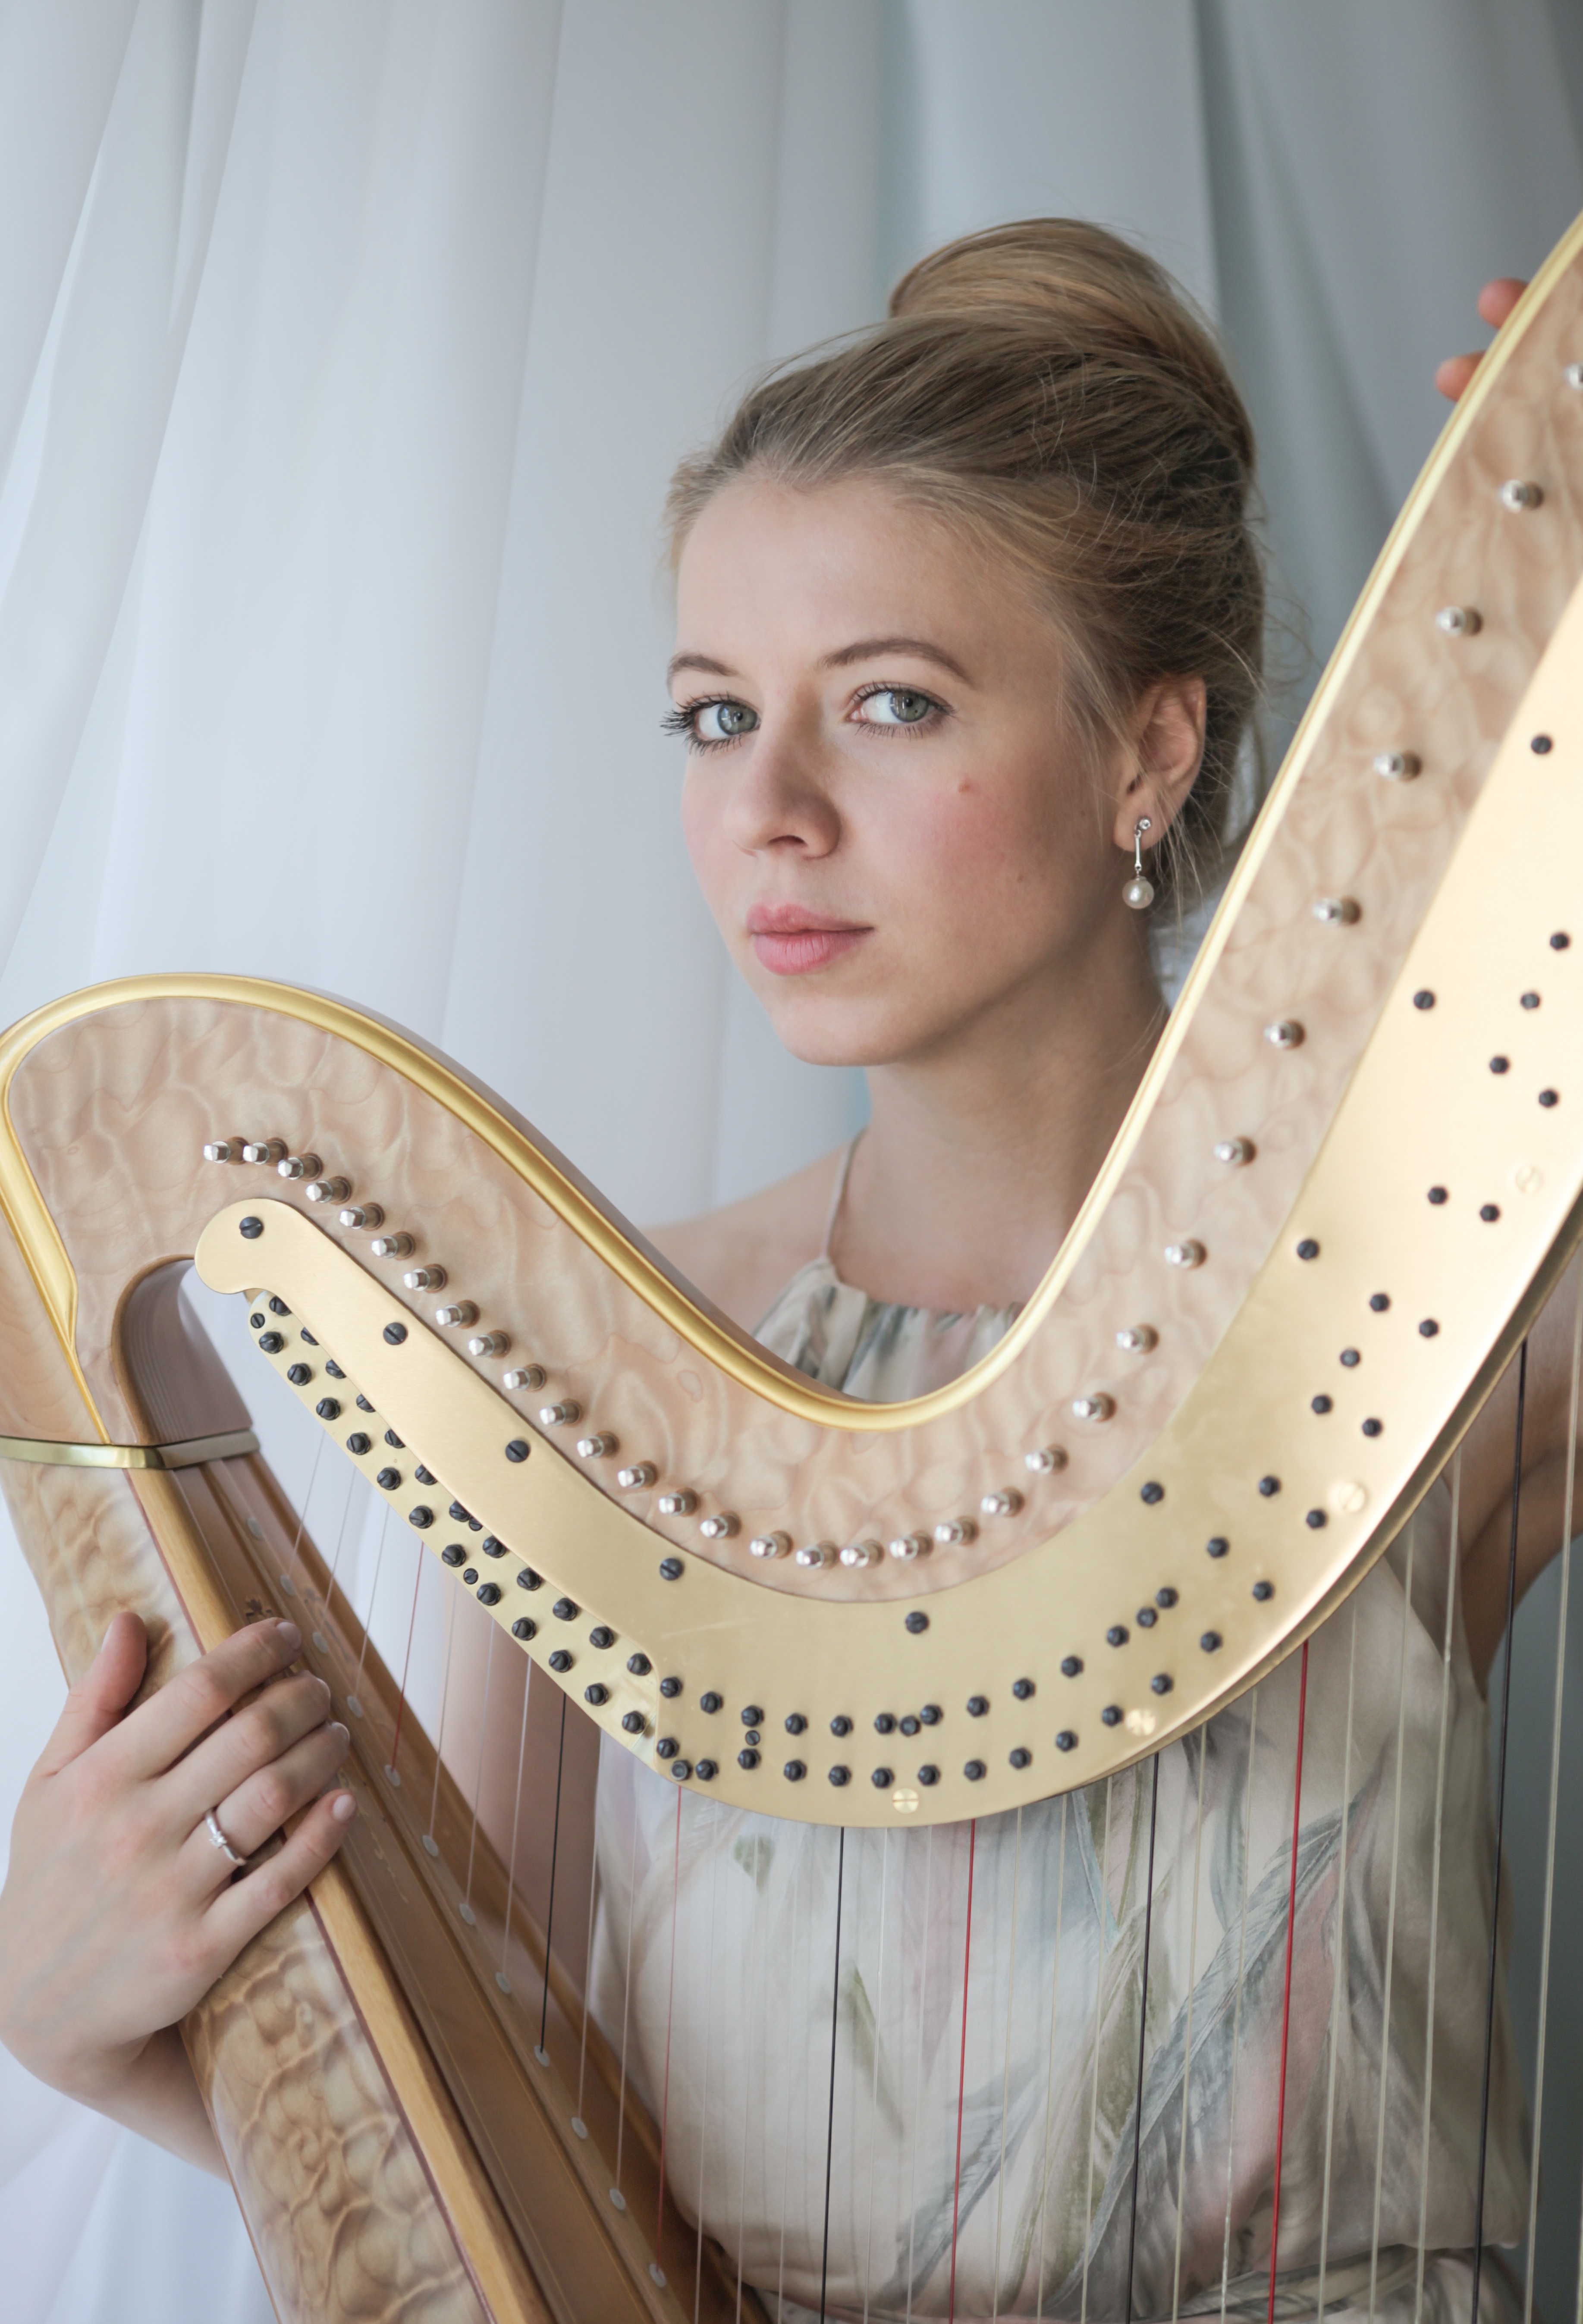 Harp in French salon. Lecture-concert of Oxana Sidiagina